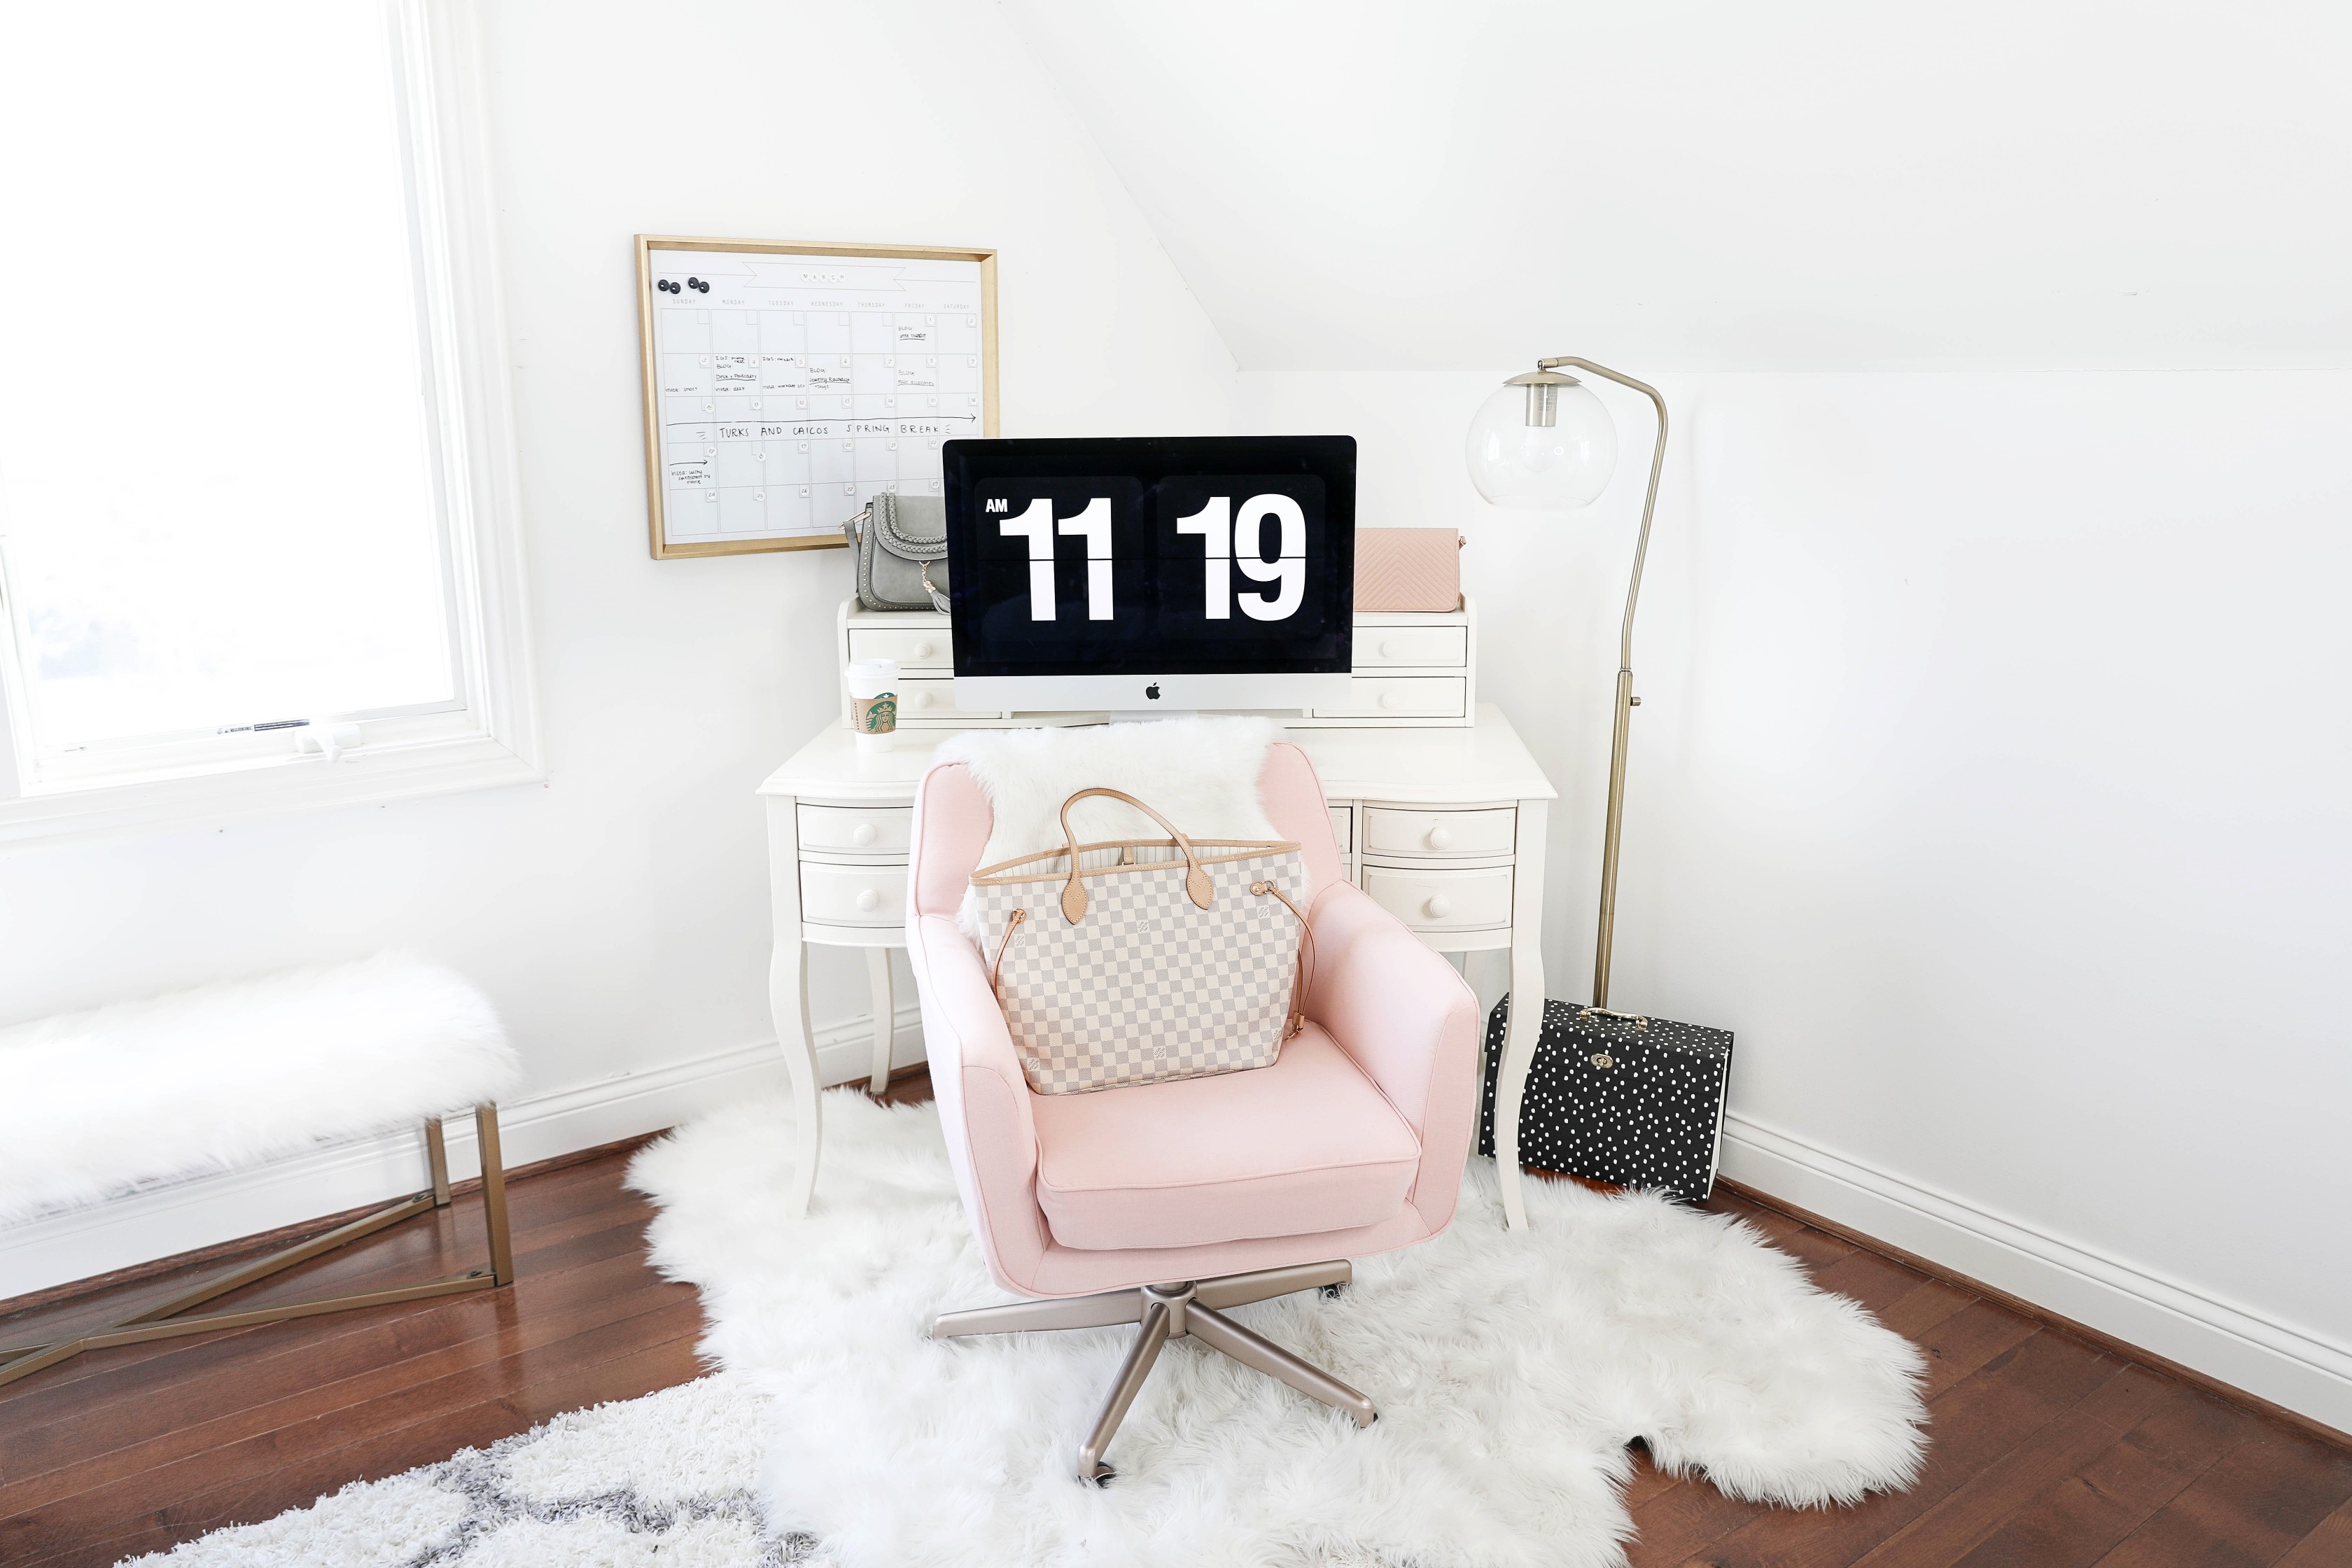 Office tour! Ultimate desk goals for the girl boss! I love this super comfy pink desk chair! I had been looking for a new chair and found the perfect one! The space looks so cute with my faux sheep fuzzy rug, and all the white, black, gold and pink. This is also the cutest gold dry erase calendar! Details on fashion and lifestyle blog daily dose of charm by lauren lindmark